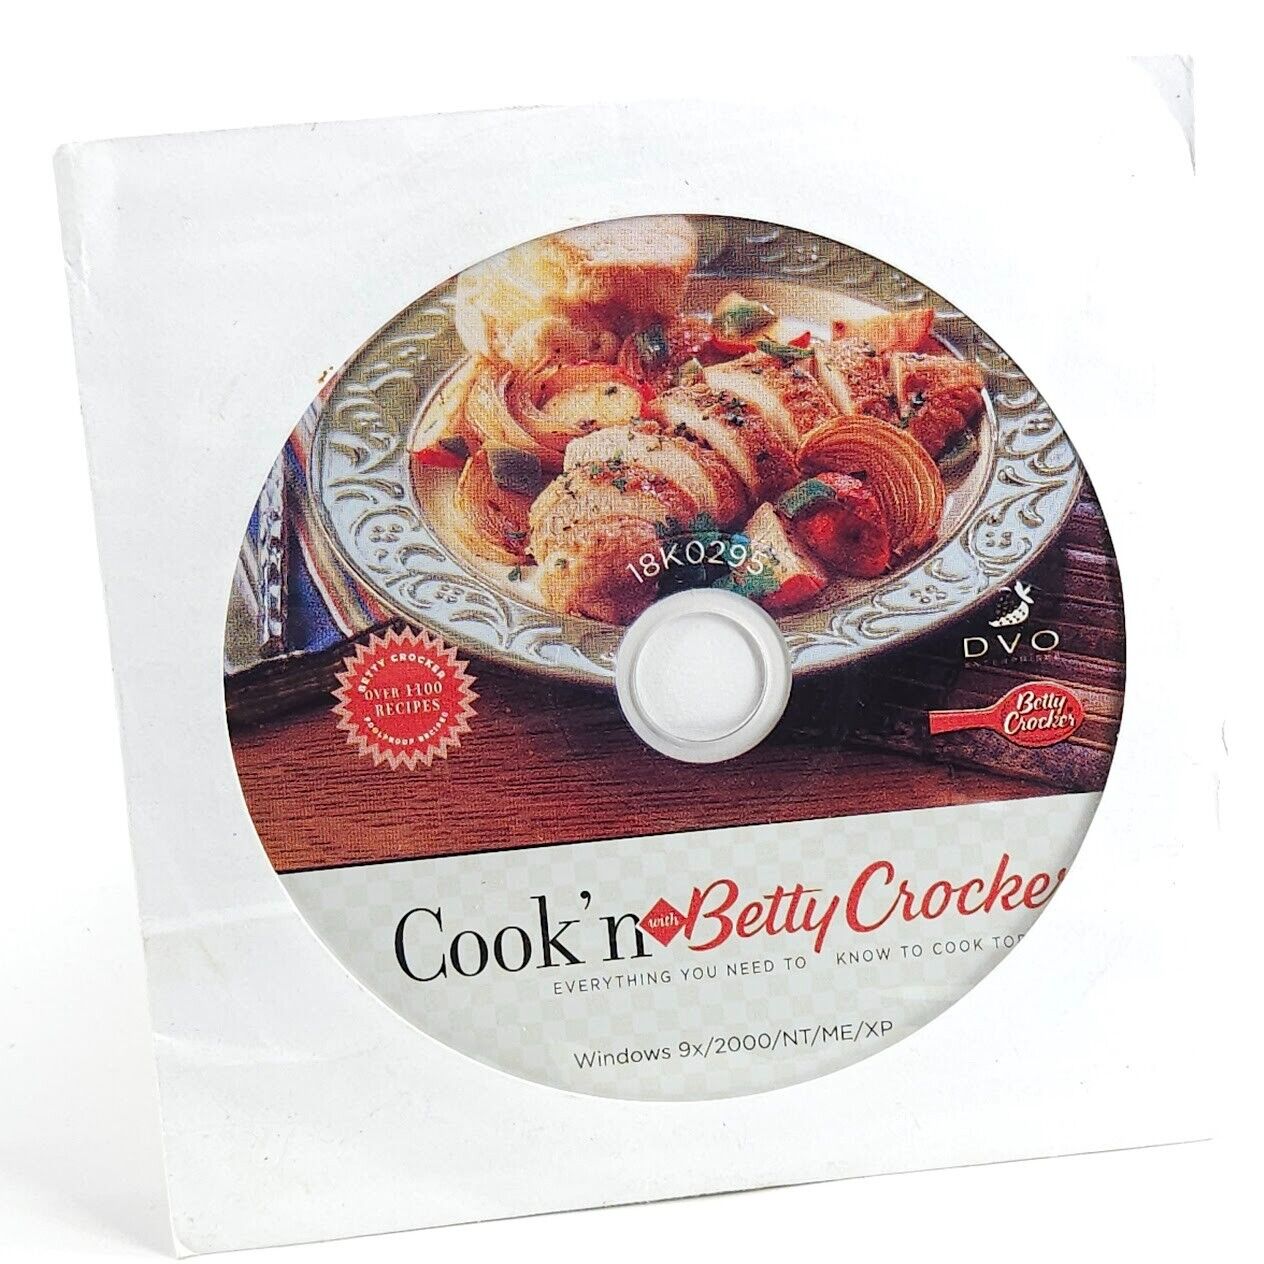 Cook\'n w/ Betty Crocker CD 2004 DVO Everything You Need To Know To Cook Today